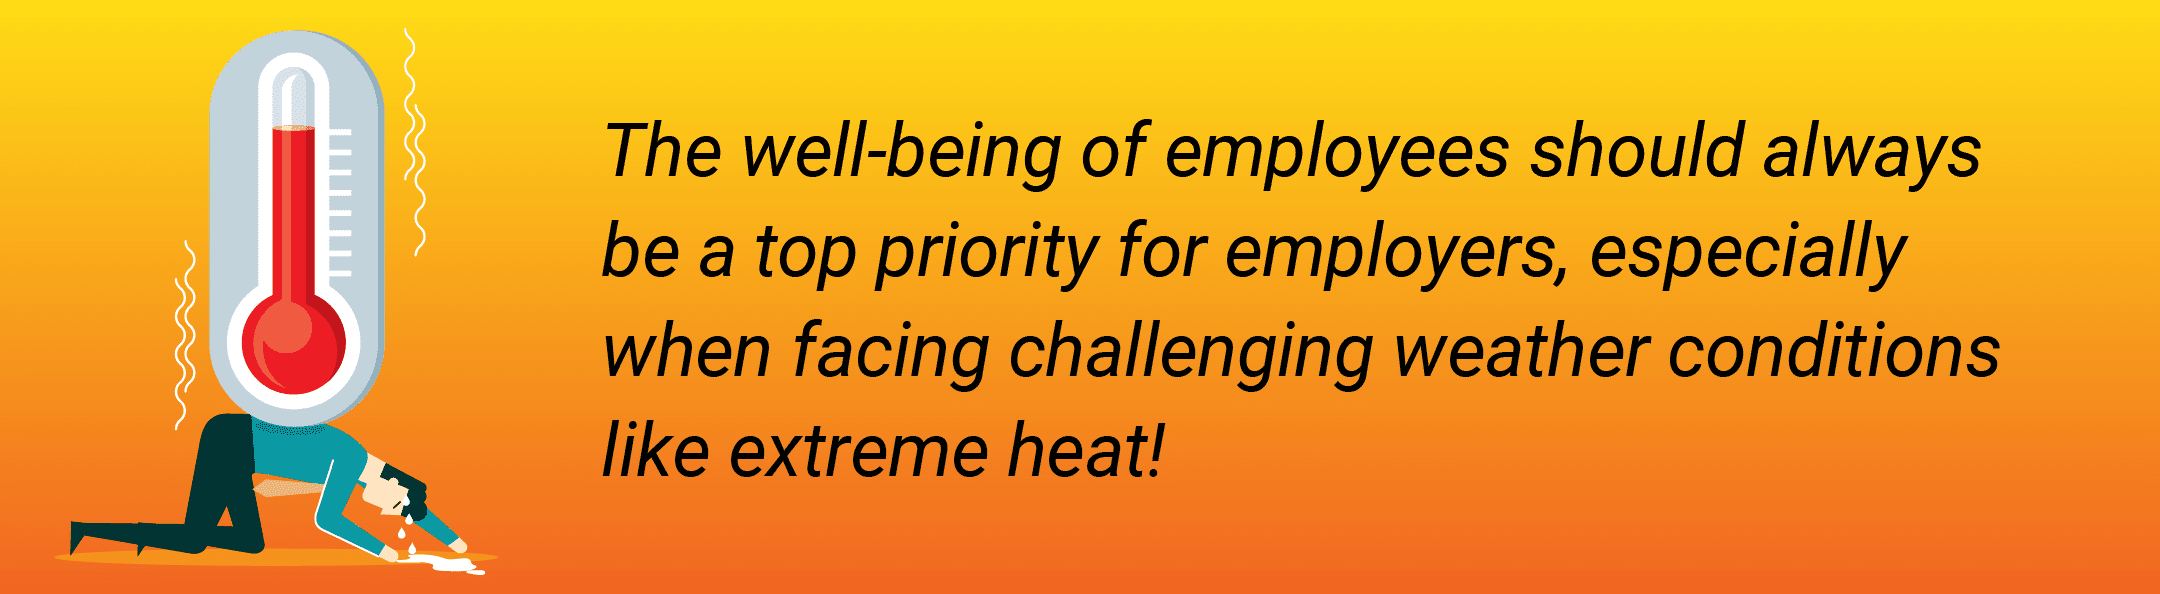 The well-being of employees should always be a top priority for employers, especially when facing challenging weather conditions like extreme heat.